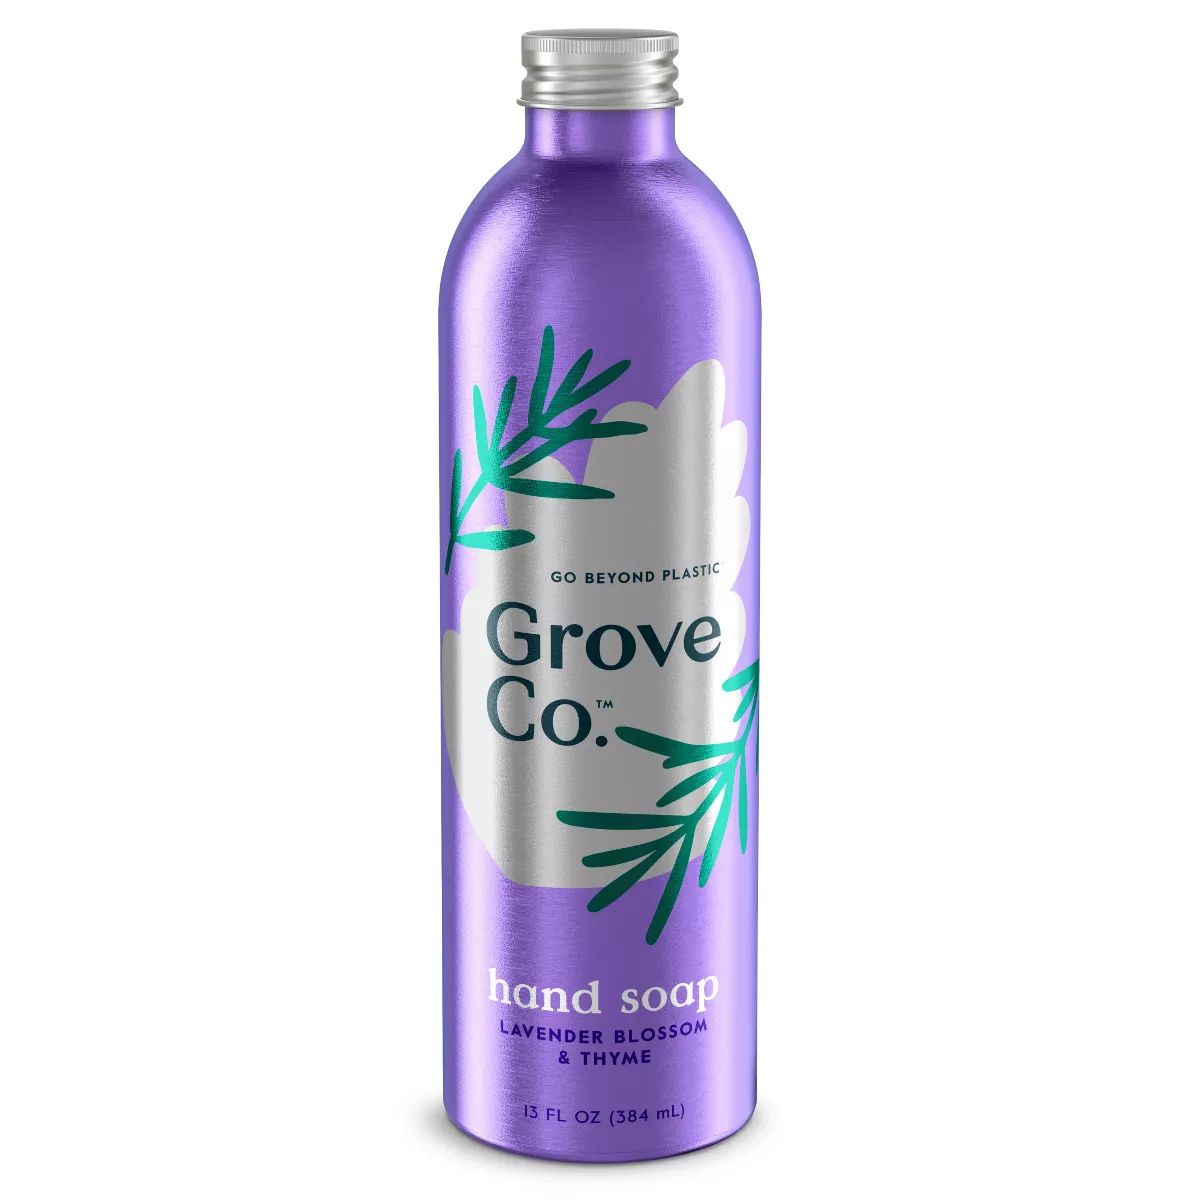 Grove Co. Hydrating Hand Soap - Lavender & Thyme - 13 fl oz | Target